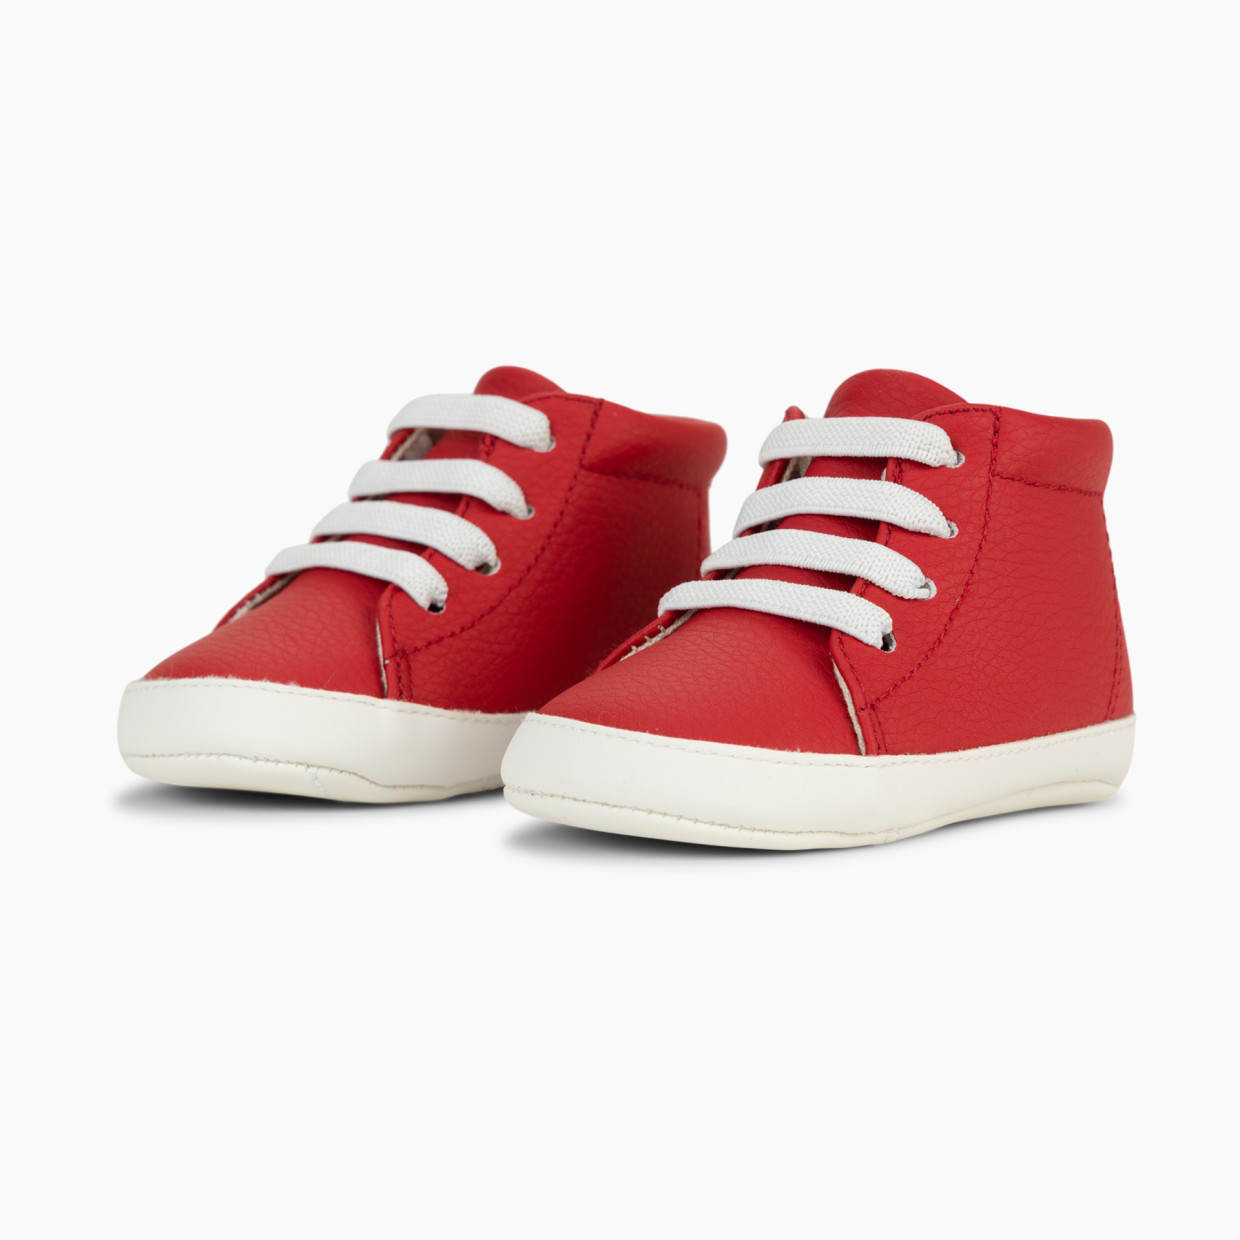 JUJUBE Eco Step Sneaker Shoes - Red, 3-6.